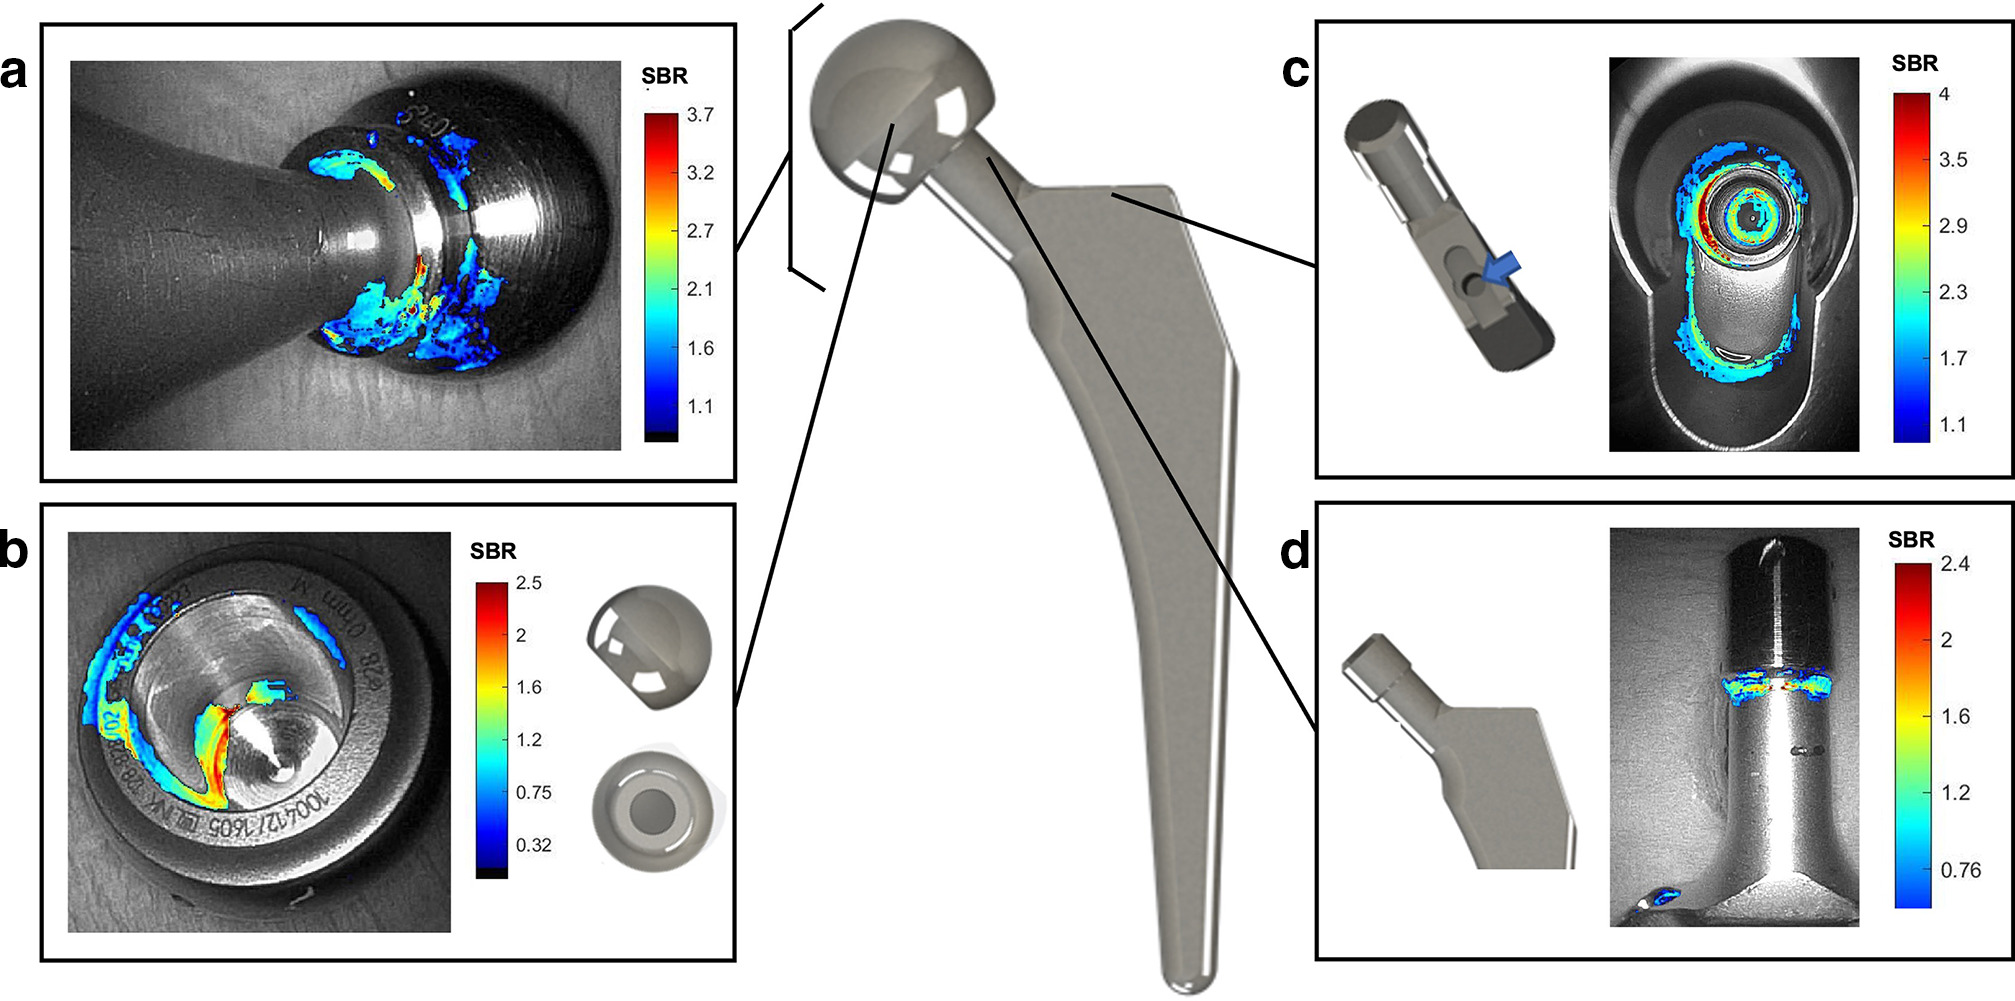 Fig. 3 
            Visualization of bacterial infection on a femoral prothesis. Representative pseudo-coloured fluorescence imaging of Stapylococcus aureus with UBI29-41-Cy5 of bacterial growth on various locations on femur prosthetic implants: a) connected head and neck of the prosthesis; b) femoral head; c) prosthesis ‘shoulder’ with screw hole; and d) junction between femoral neck and taper (for femoral head fixation). SBR, signal-to-background ratio of fluorescence intensity with accompanying scale bar. n > 8.
          